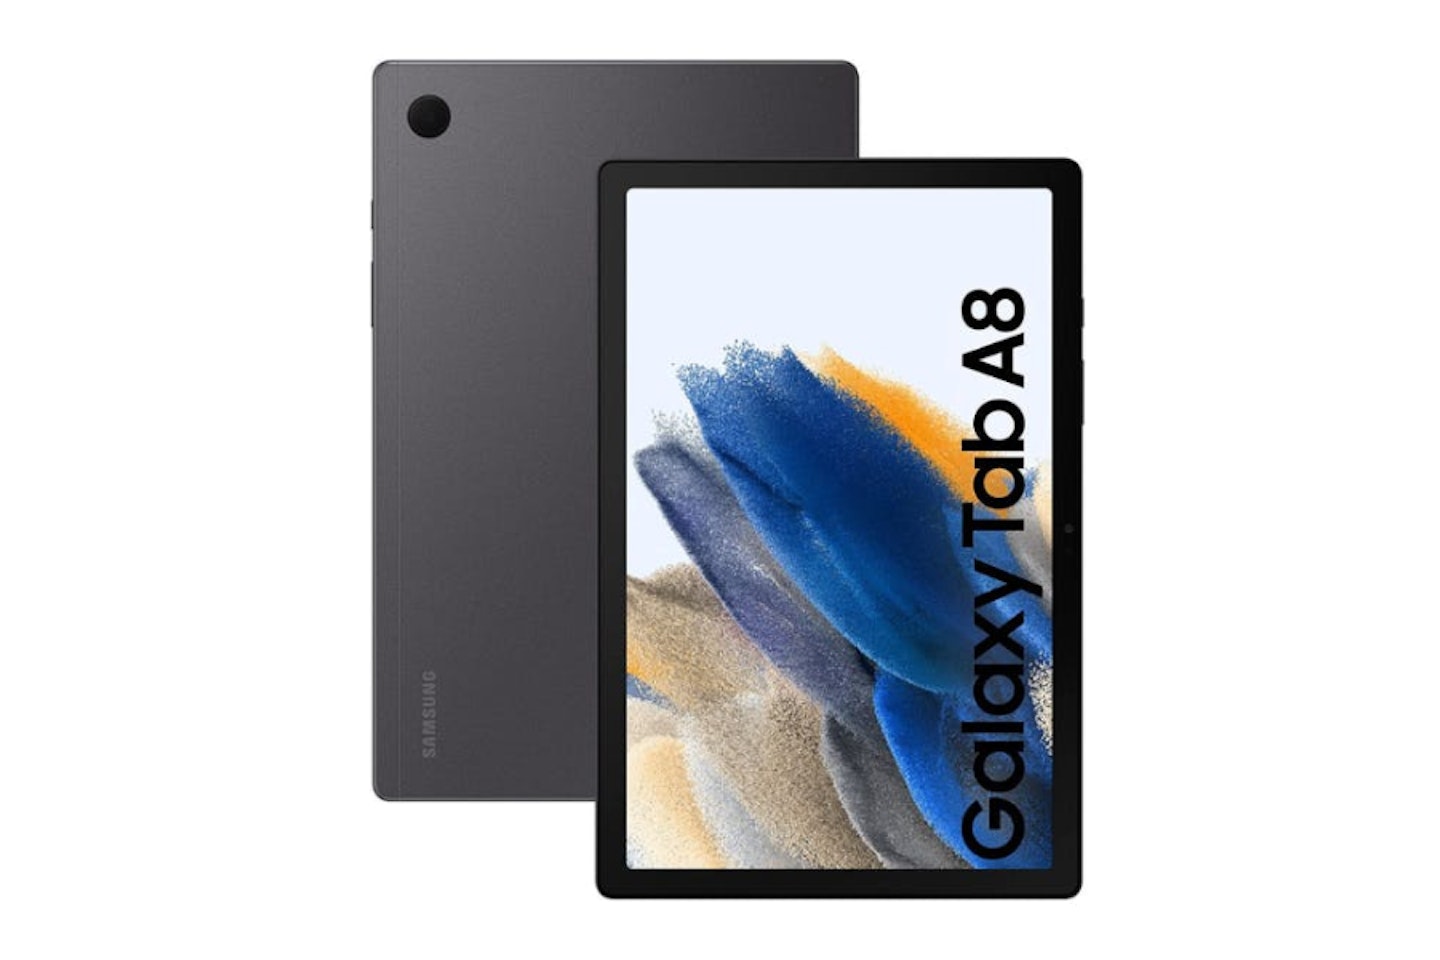 Samsung Galaxy Tab A8 - one of the best Android tablets